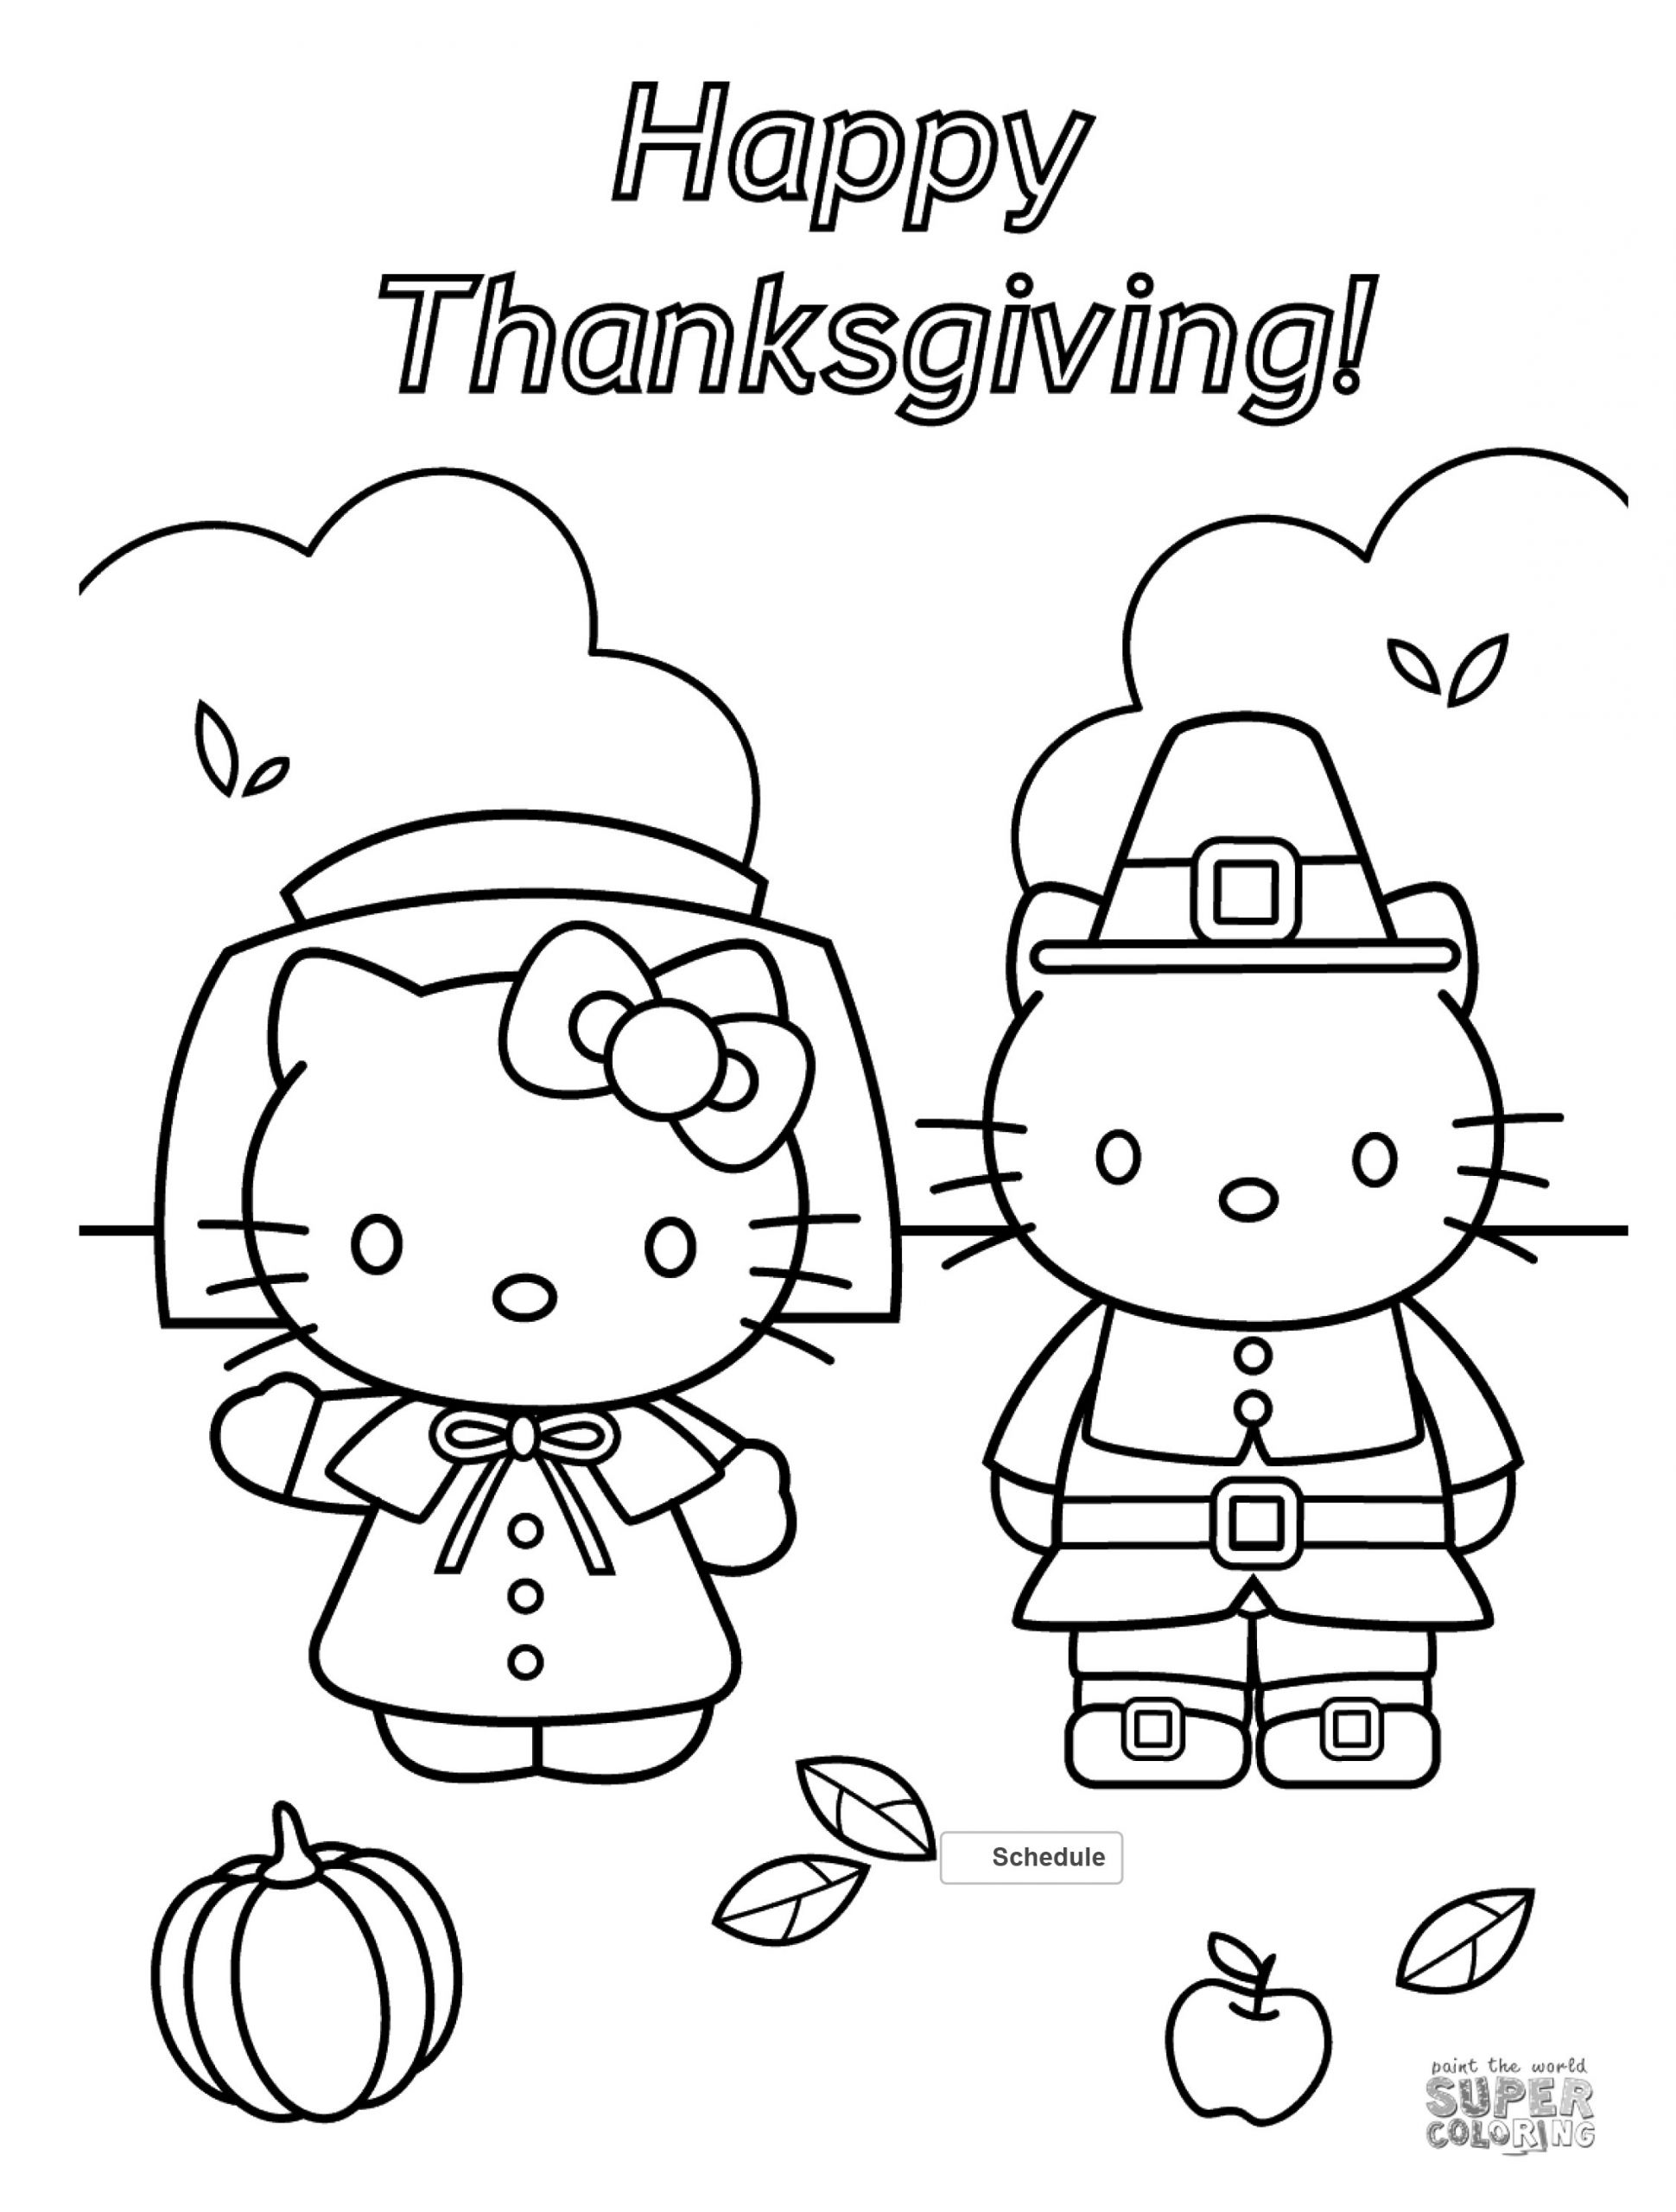 Thanksgiving Coloring Sheets For Kids
 FREE Thanksgiving Coloring Pages for Adults & Kids